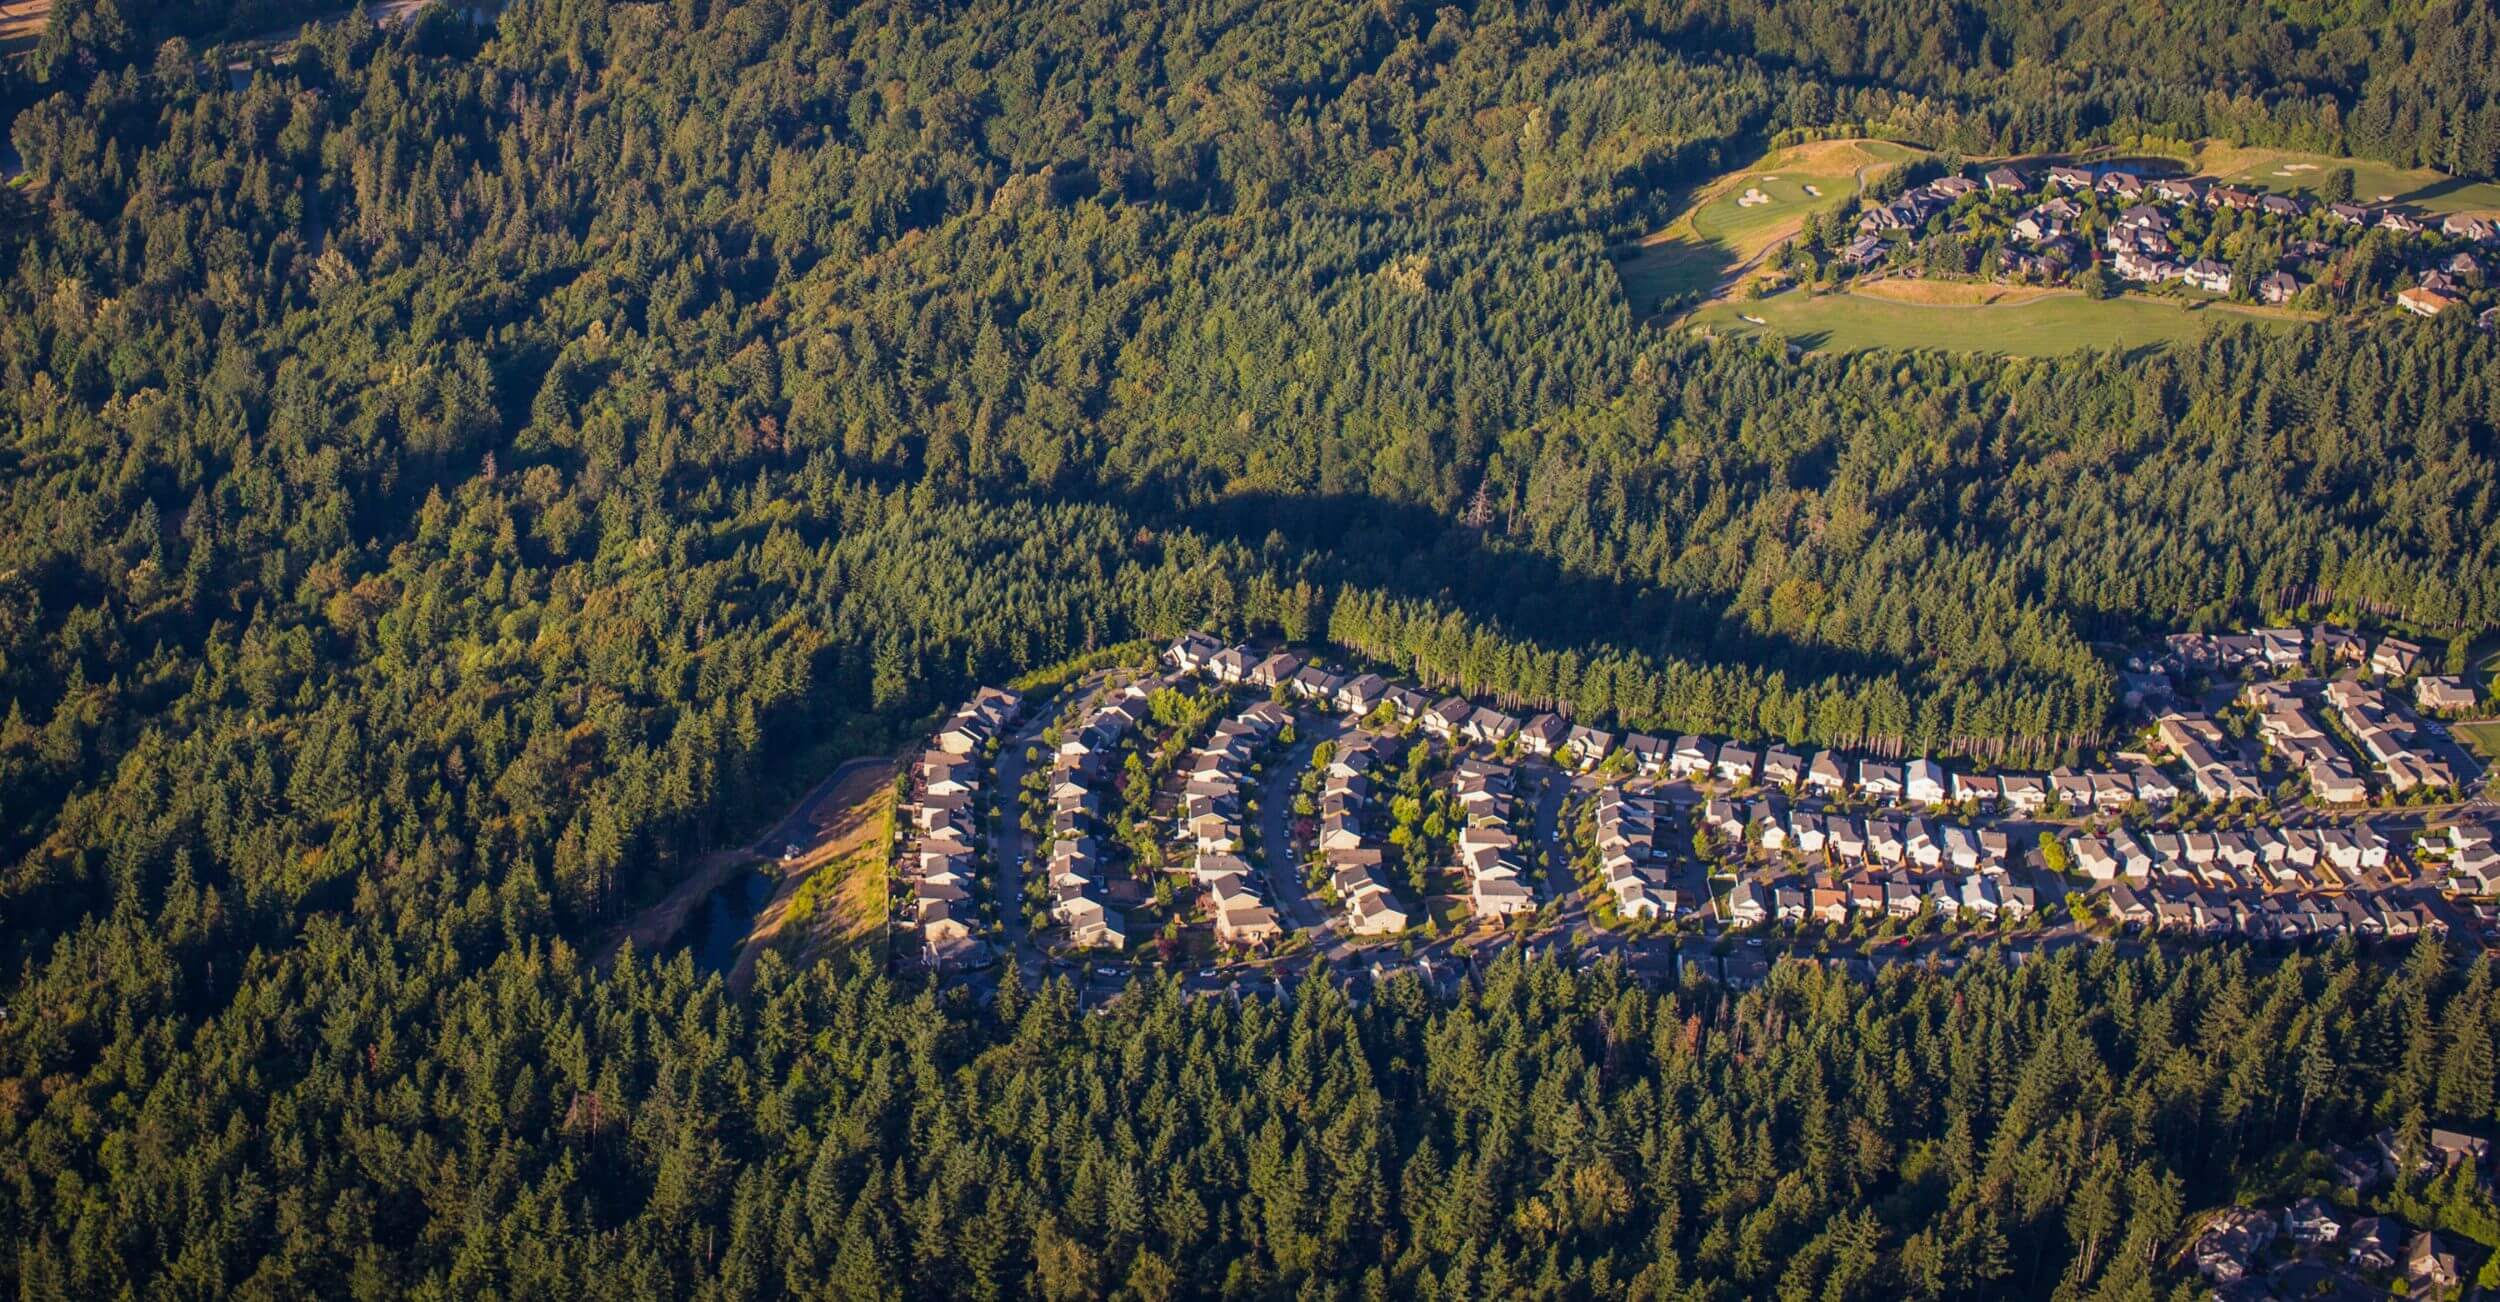 An aerial shot of a tree-filled landscape. In the center, a cluster of houses juts into the otherwise green, uninterrupted forest.